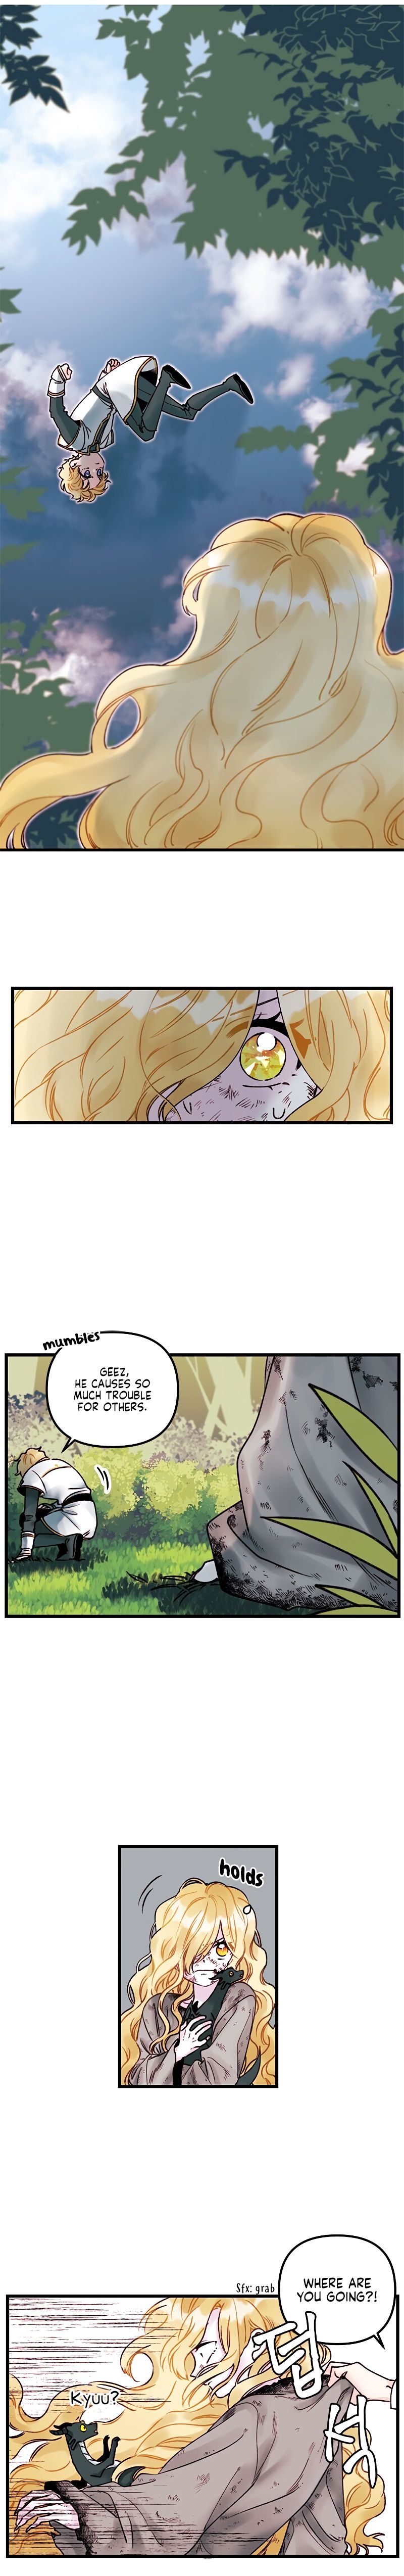 The Princess in the Dumpster - Chapter 2 Page 7